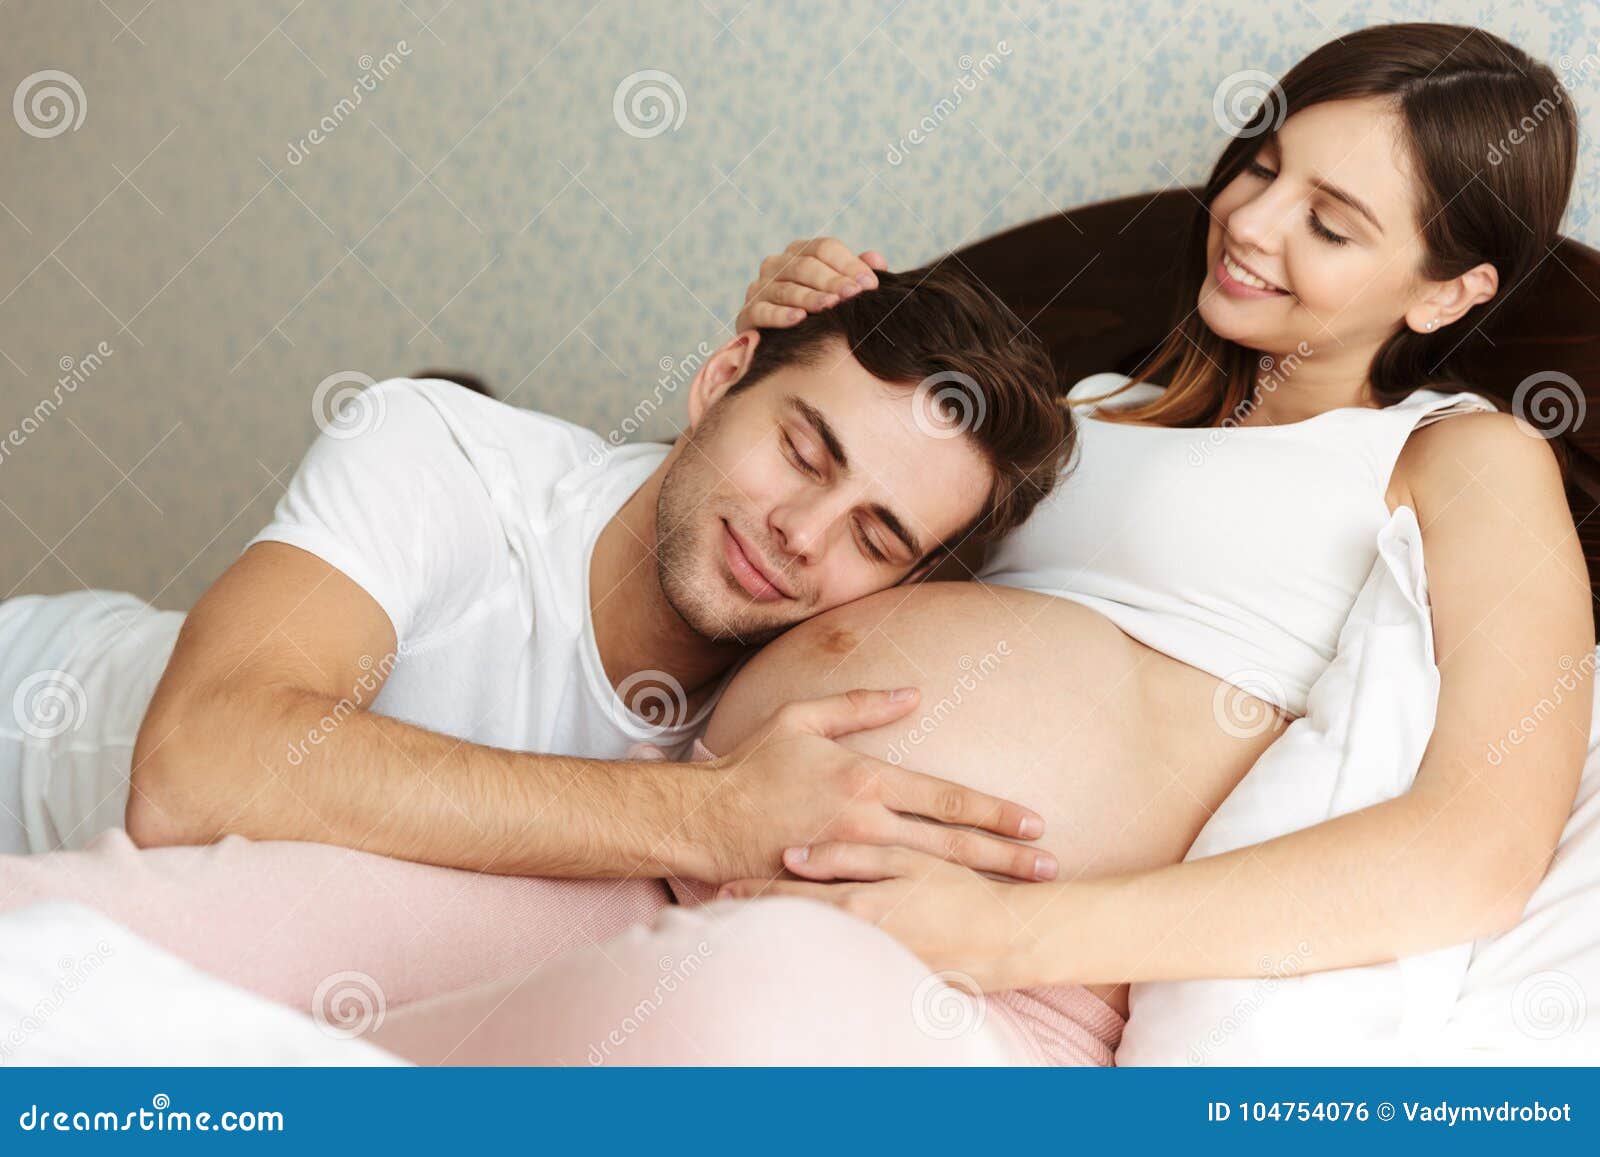 Smiling Young Pregnant Wife Lying in Bed with Her Husband Stock Photo picture